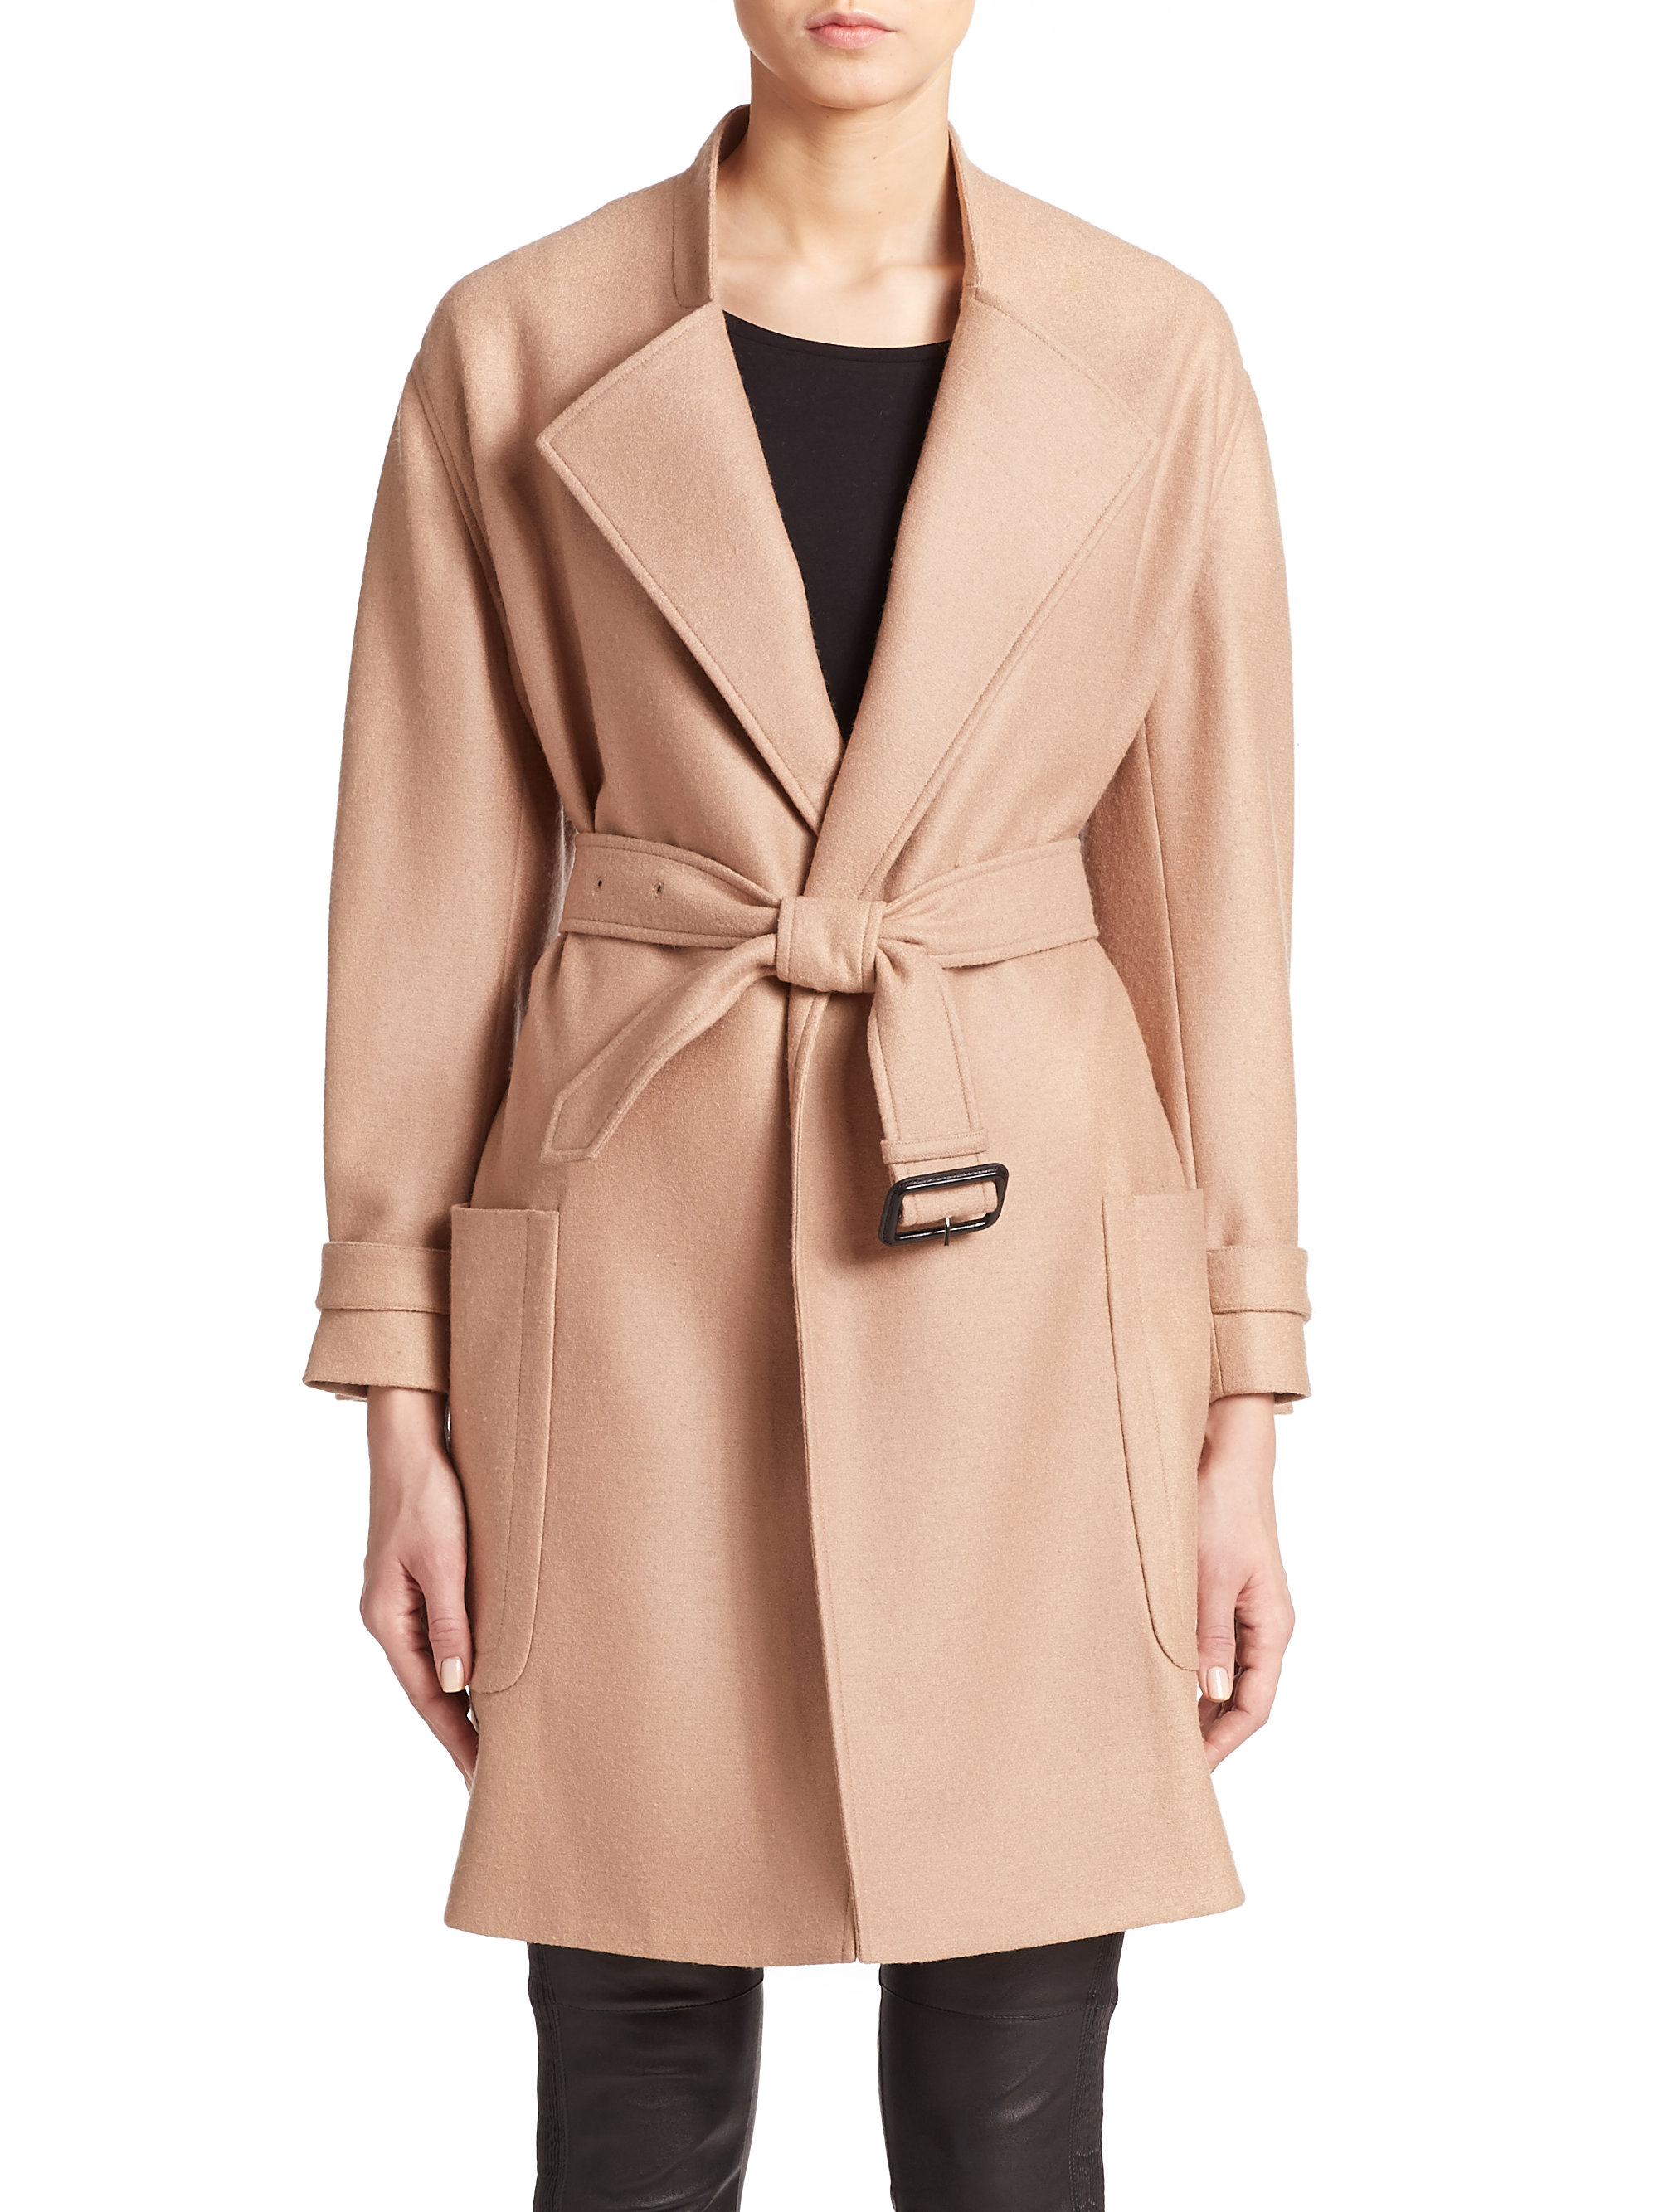 Burberry london Heronsby Wool/cashmere Wrap Coat in Beige (camel) | Lyst